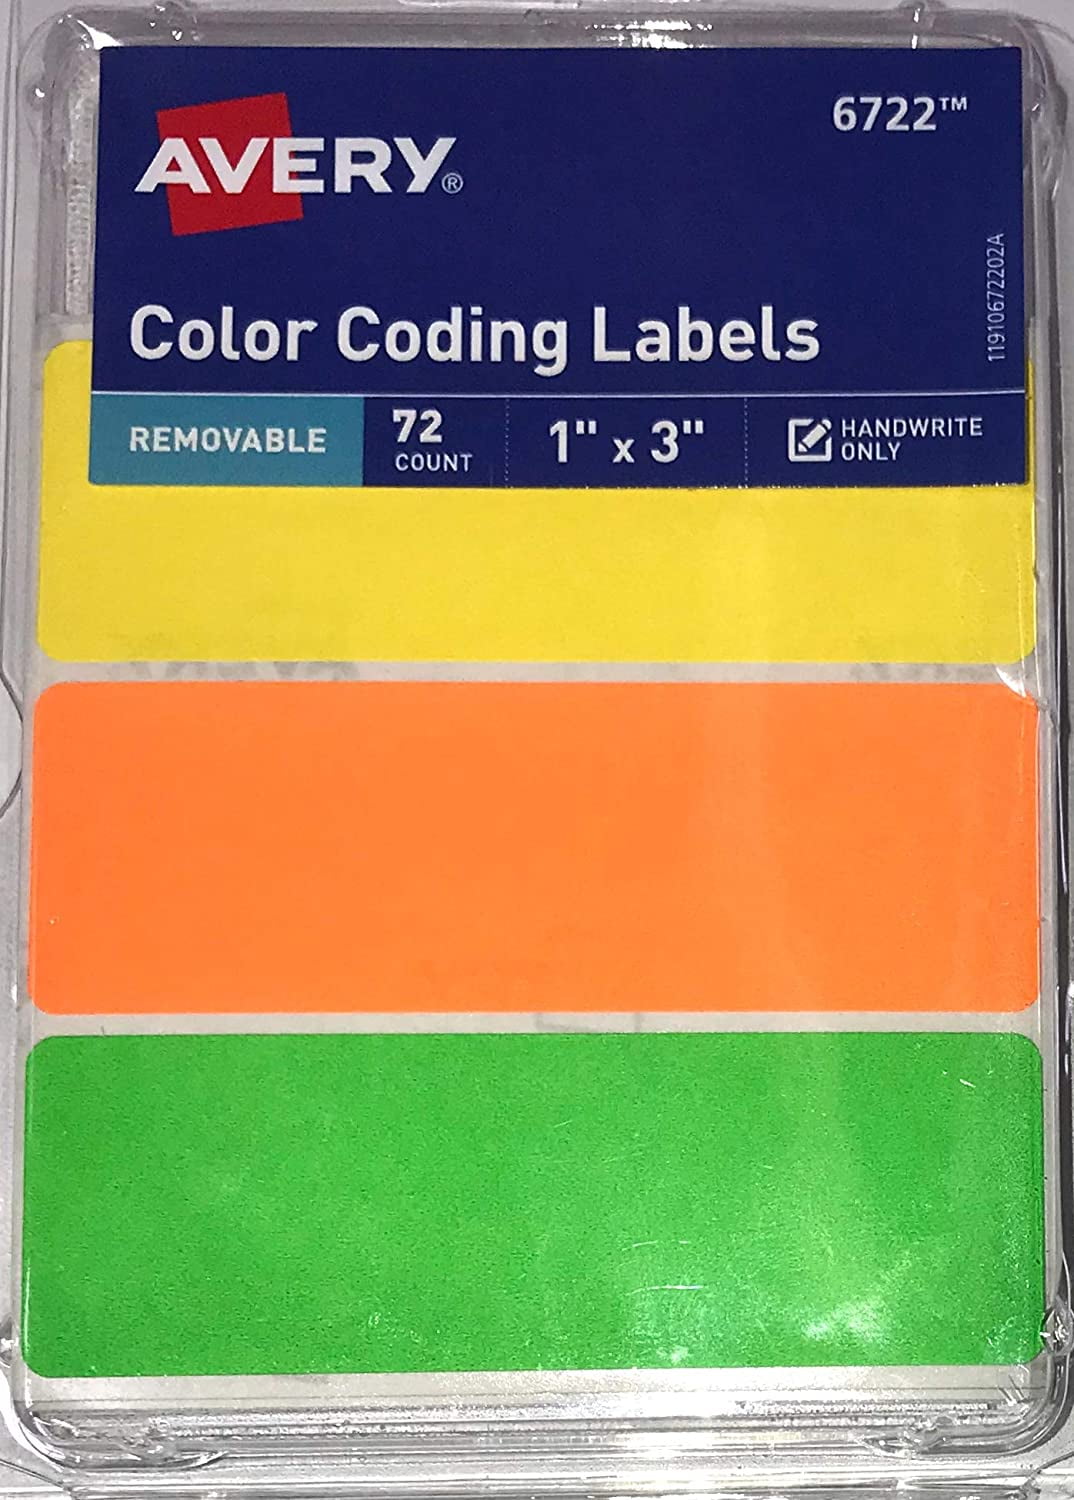 Avery 6722 Removable 1 X 3 Rectangular Neon Color Coding Labels, 72 Count